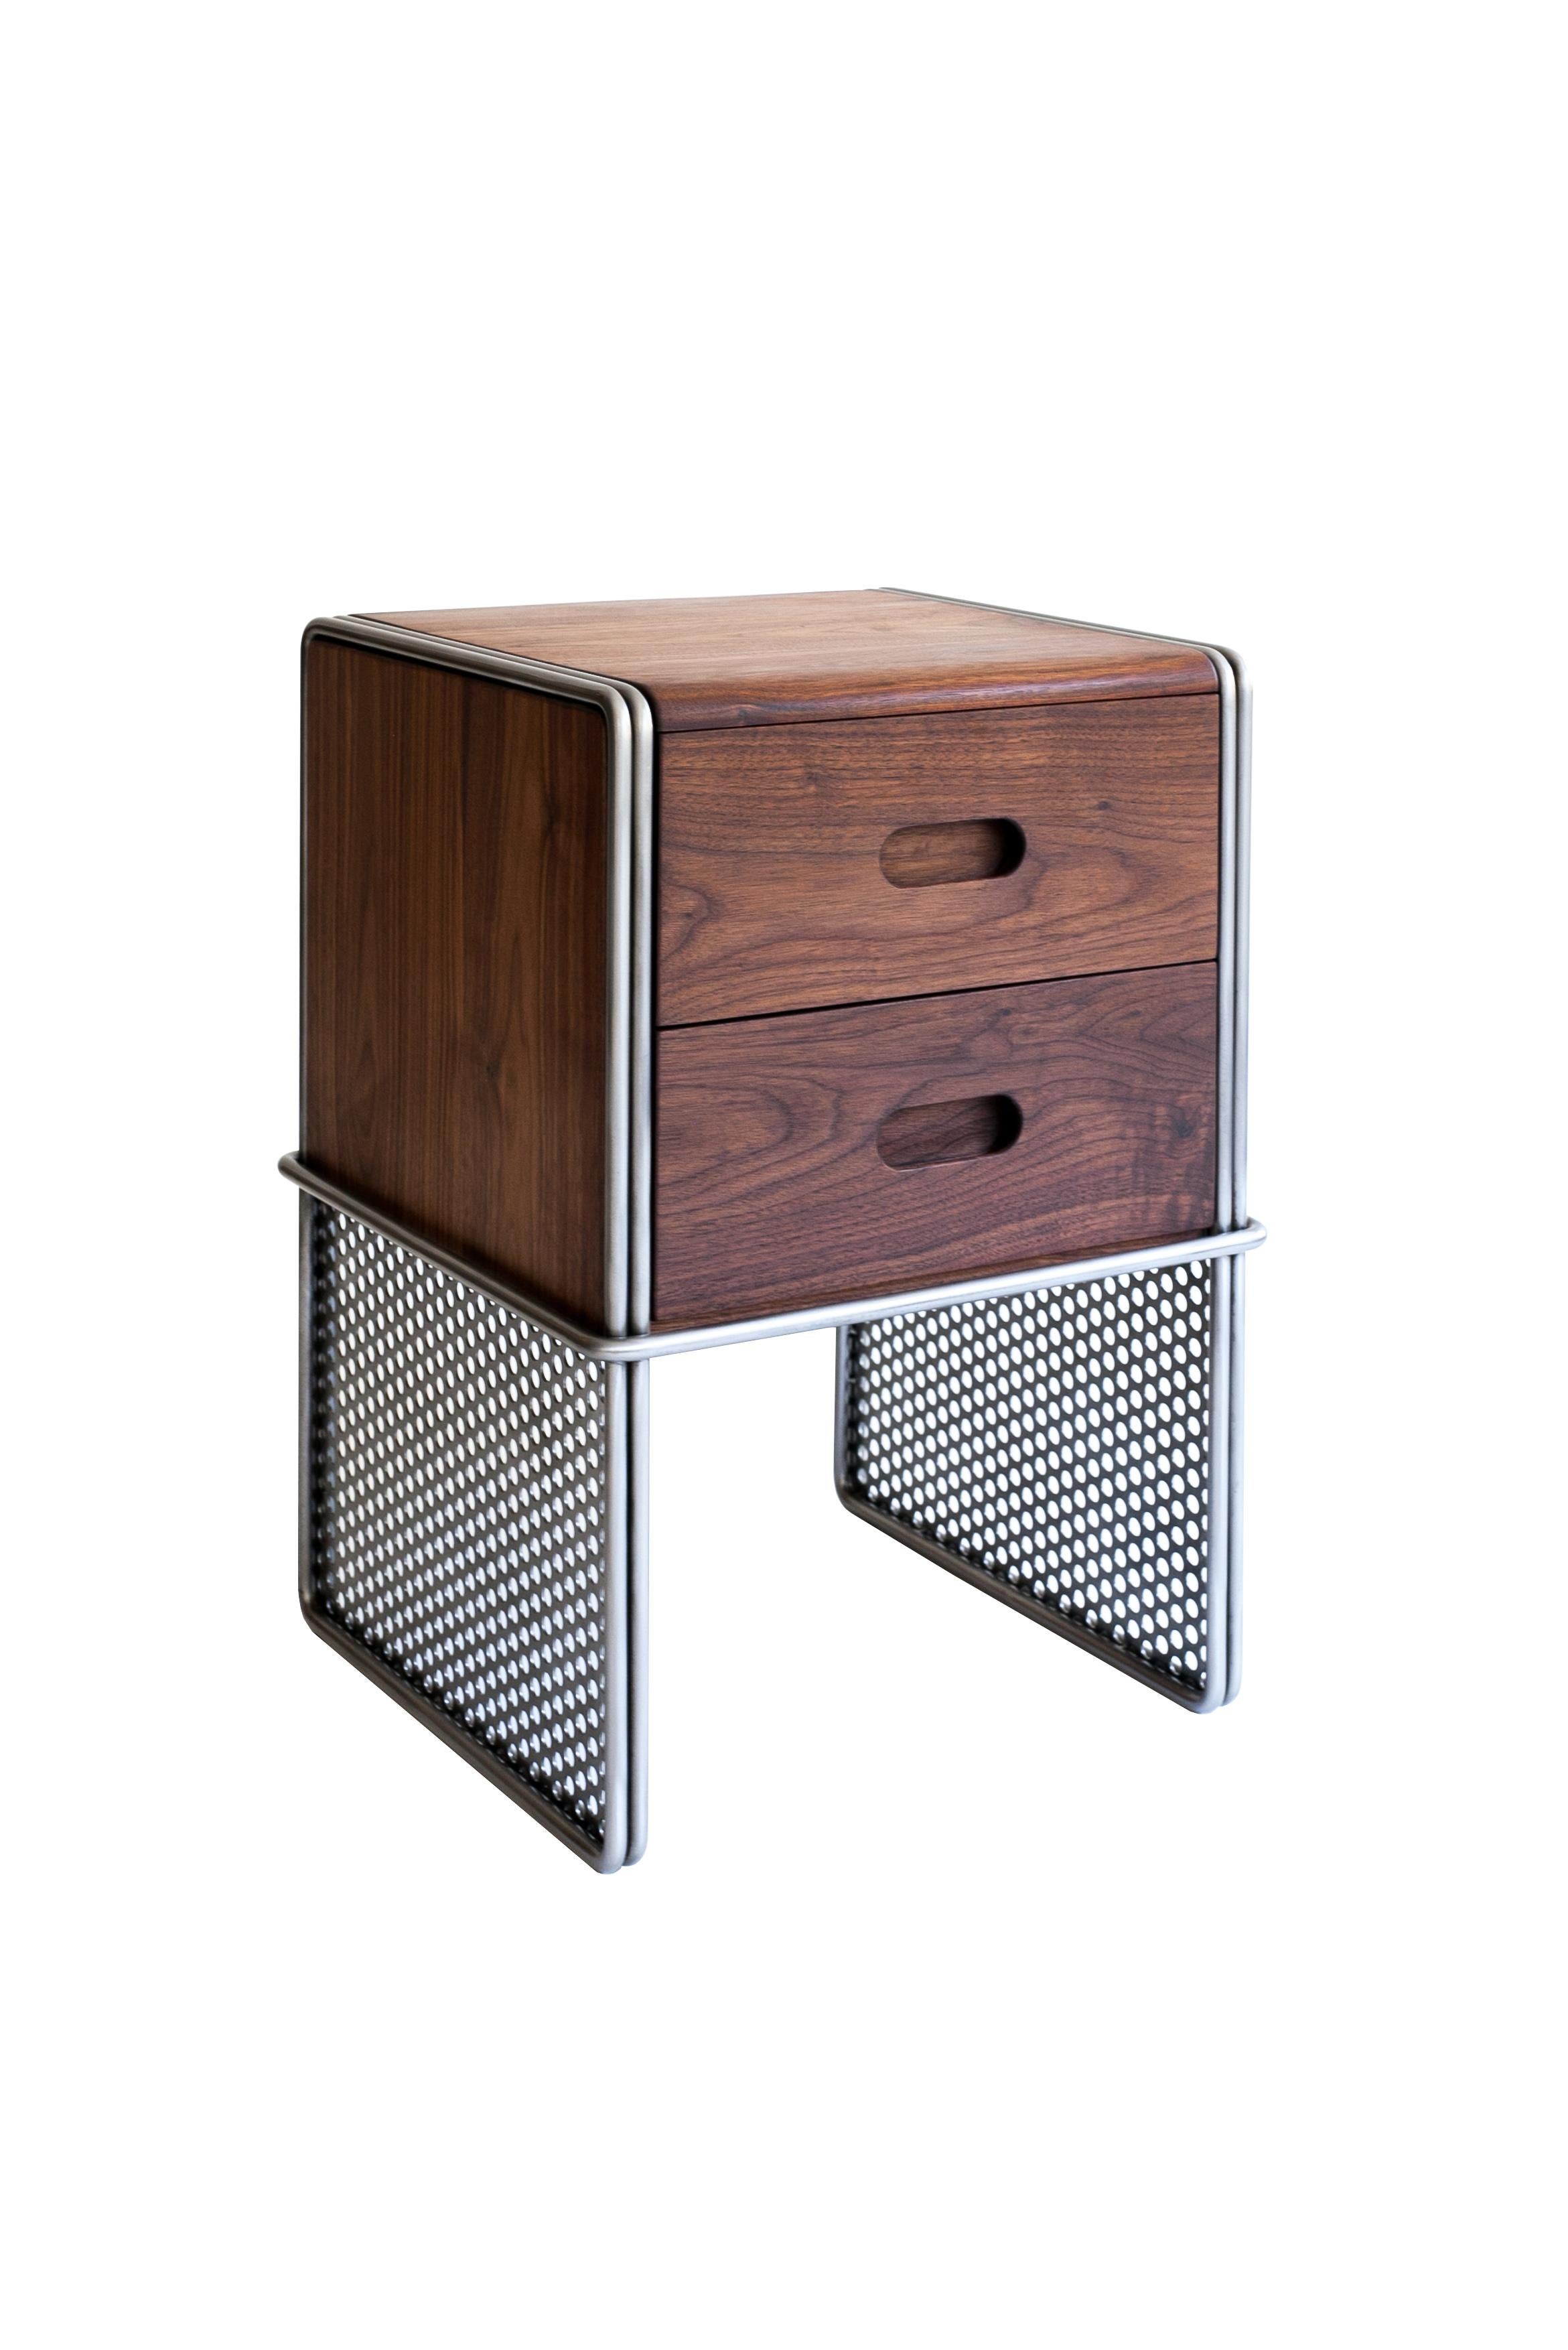 The Smith & Wesson double drawer is an Industrial Mid-Century Modern style bedside table or office storage unit. The wood is encased in a signature-style metal frame. Inspired by gun handles and hollowed features of bullet-ridden metal sheets. The